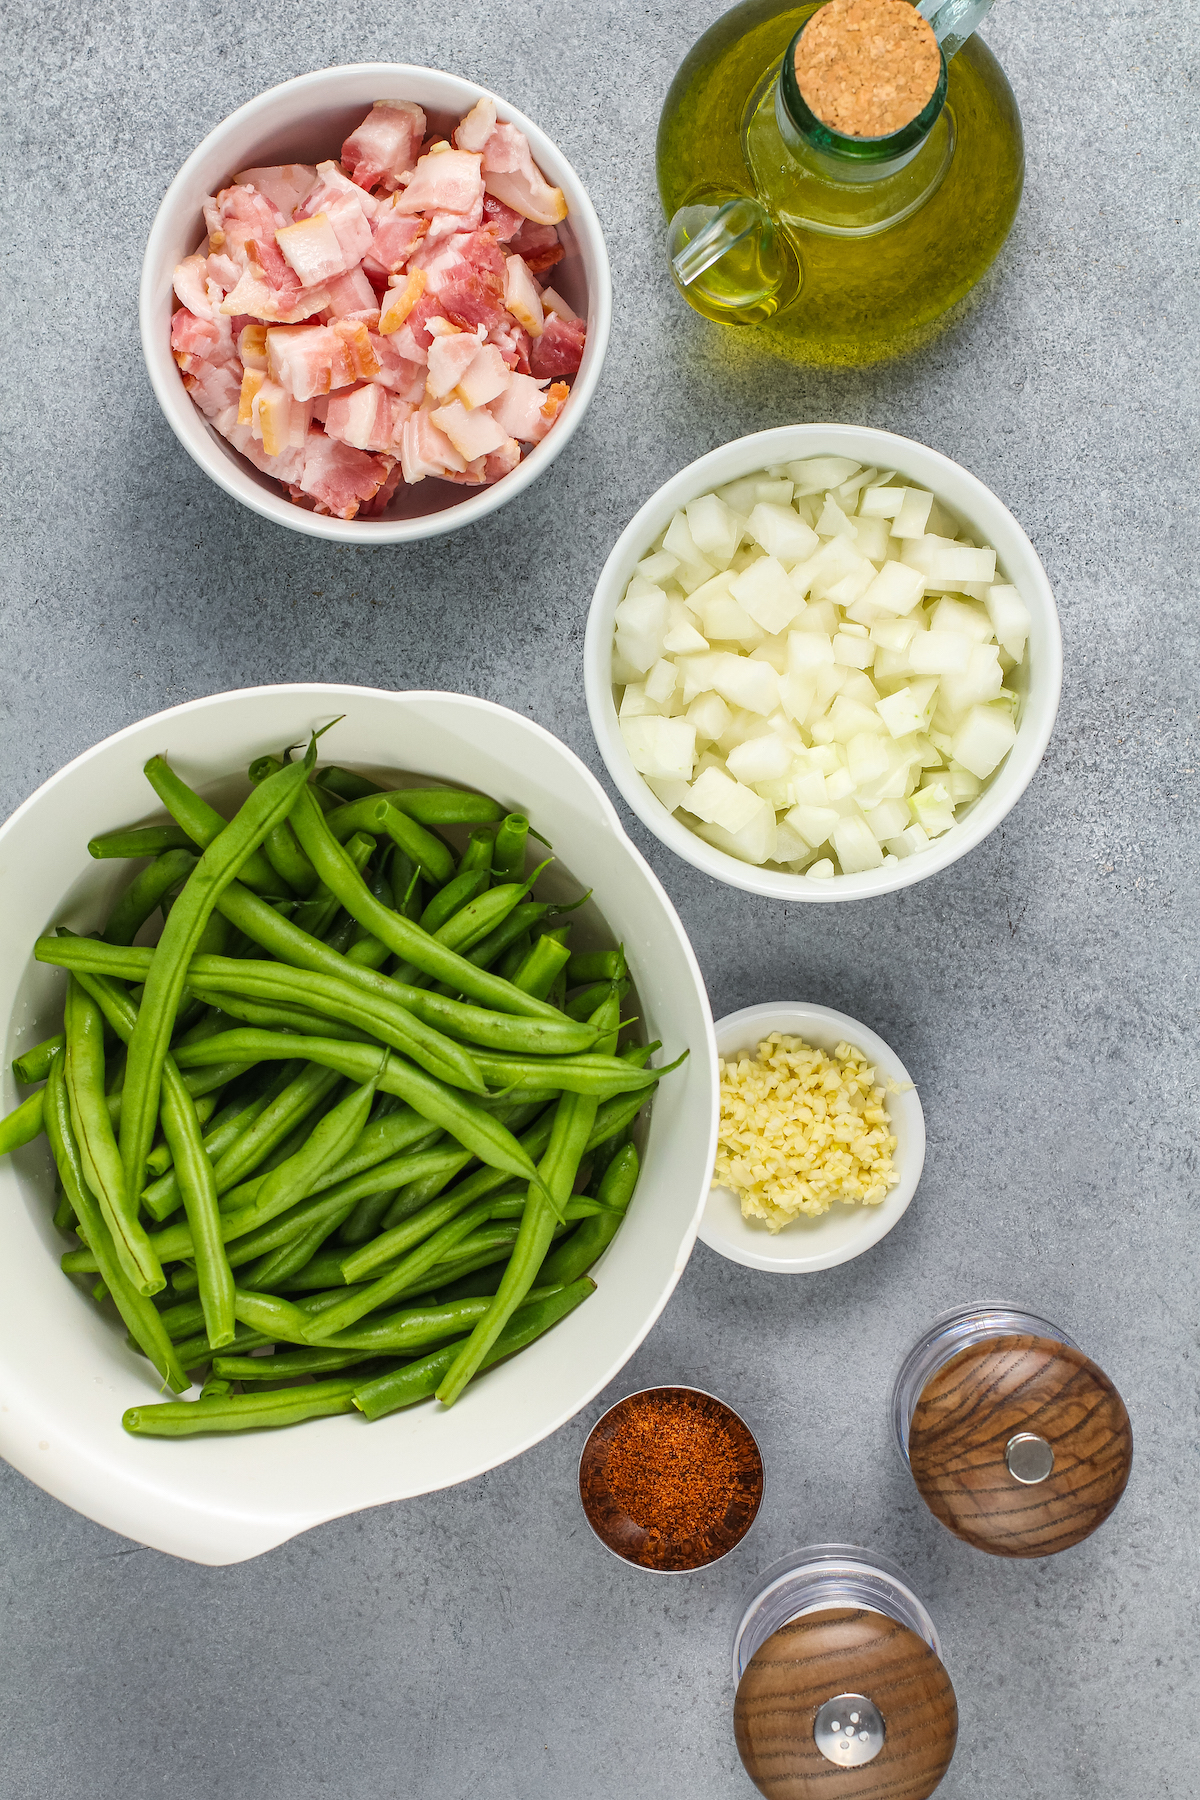 Ingredients for sautéed green beans.